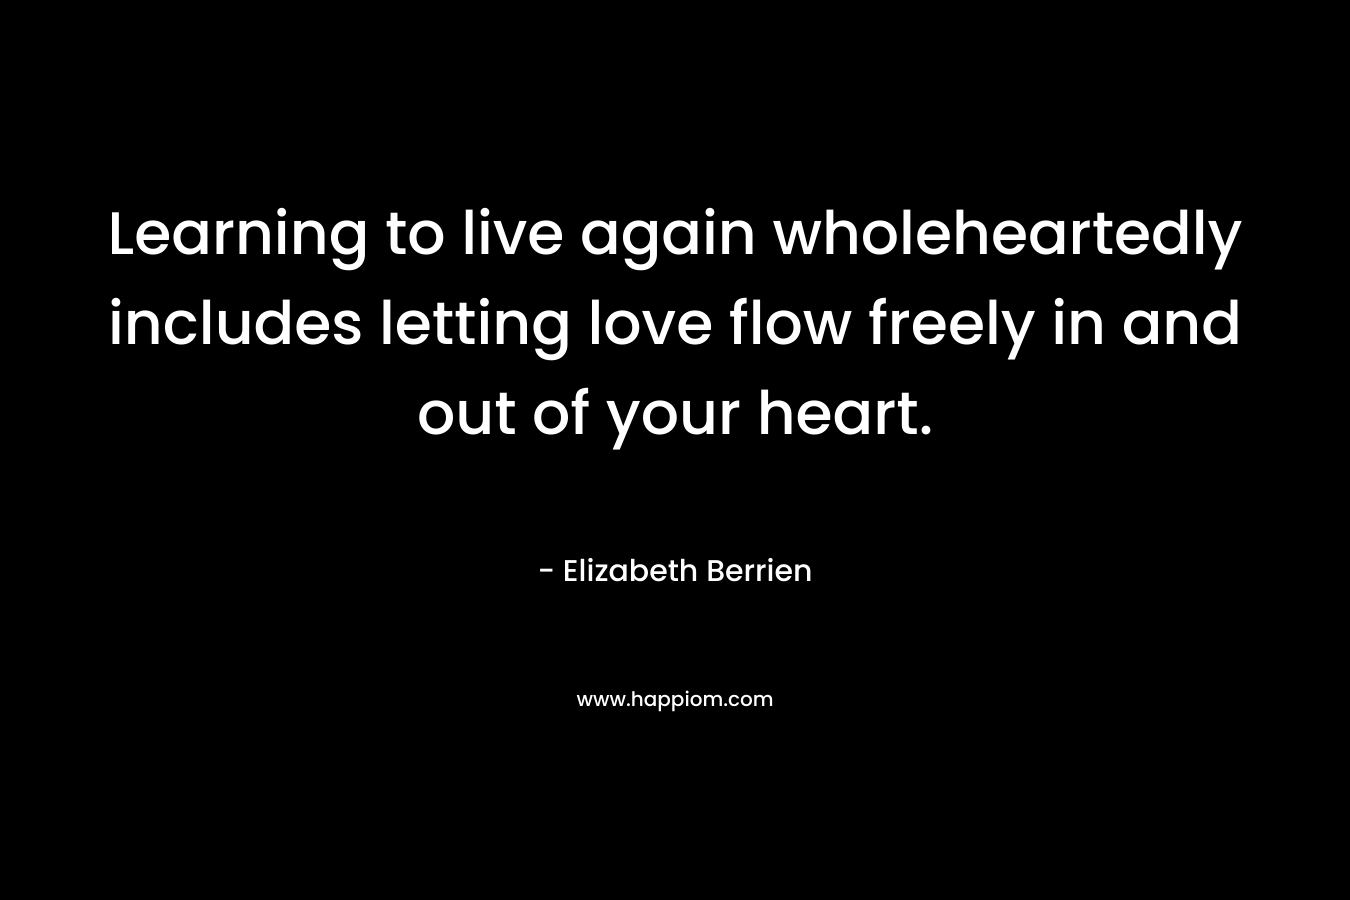 Learning to live again wholeheartedly includes letting love flow freely in and out of your heart.